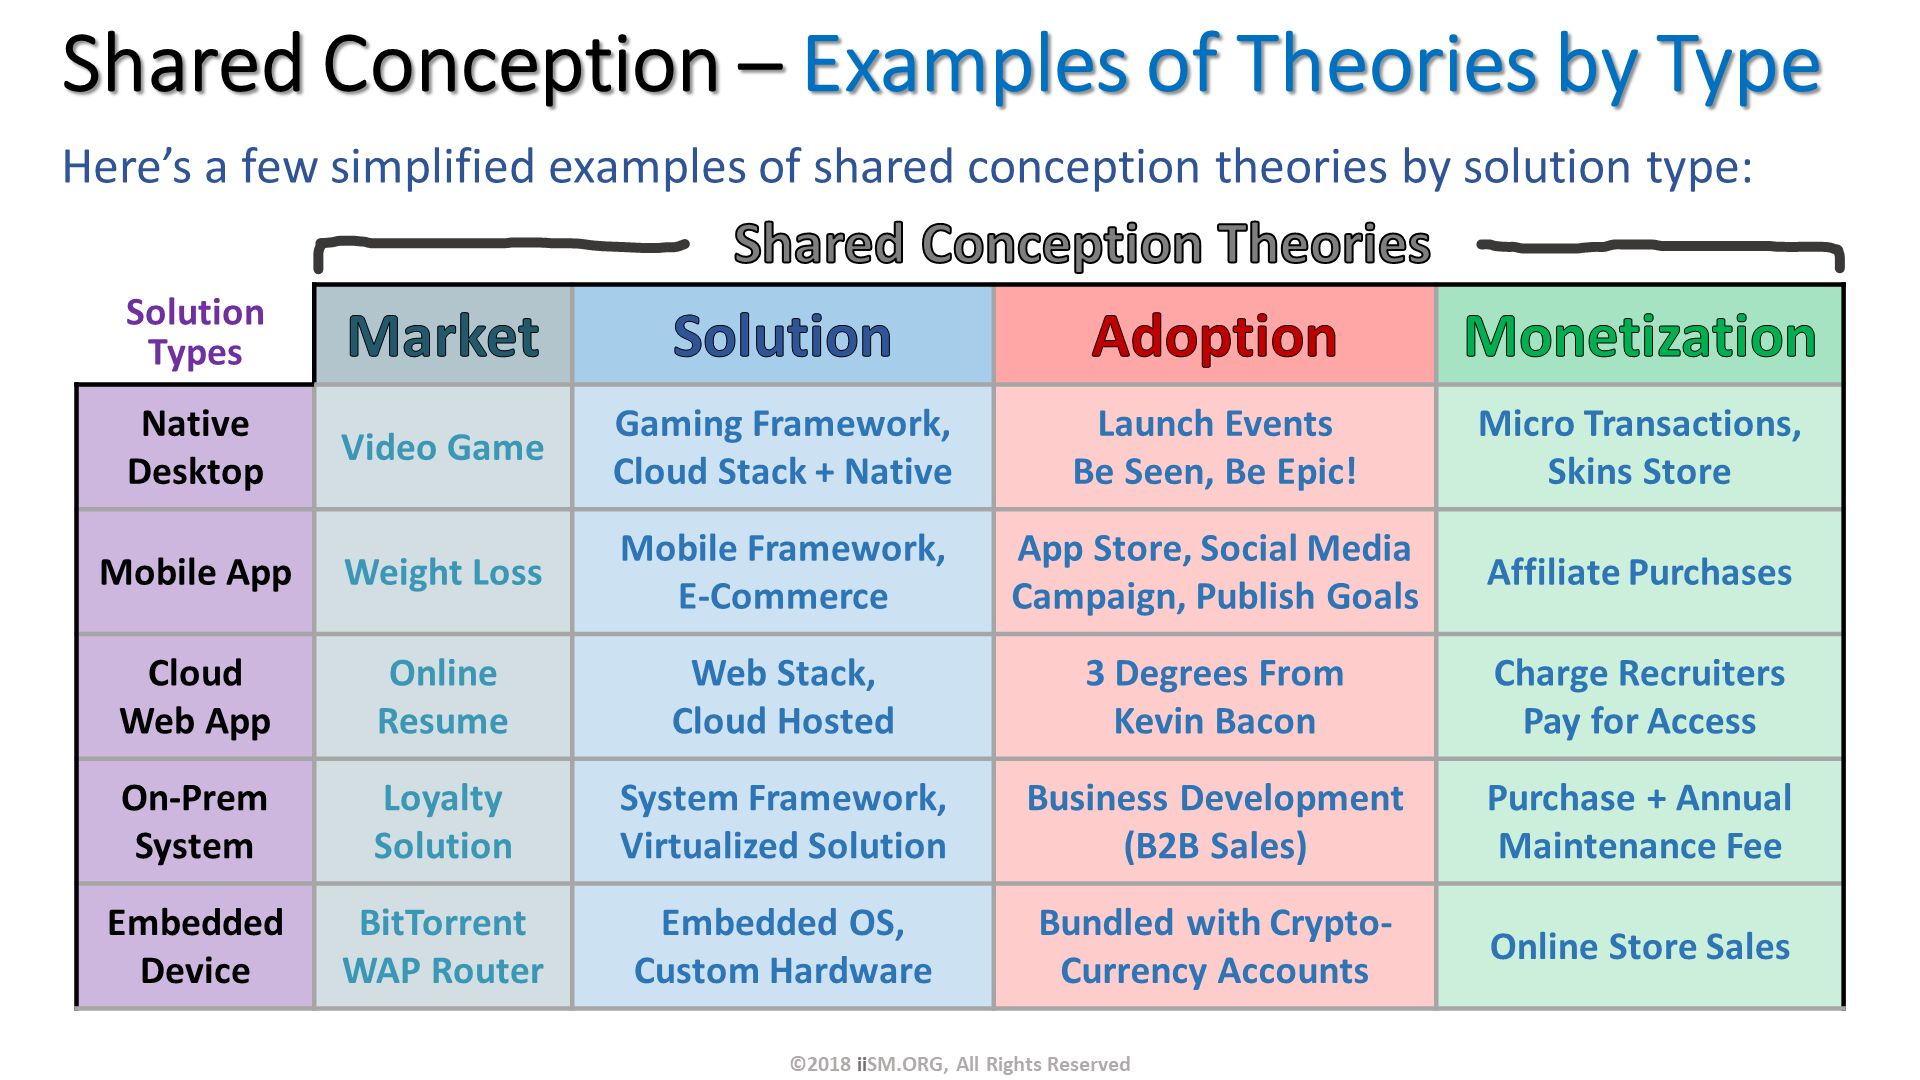 ©2018 iiSM.ORG, All Rights Reserved. Shared Conception – Examples of Theories by Type. Shared Conception Theories. Here’s a few simplified examples of shared conception theories by solution type:  . 